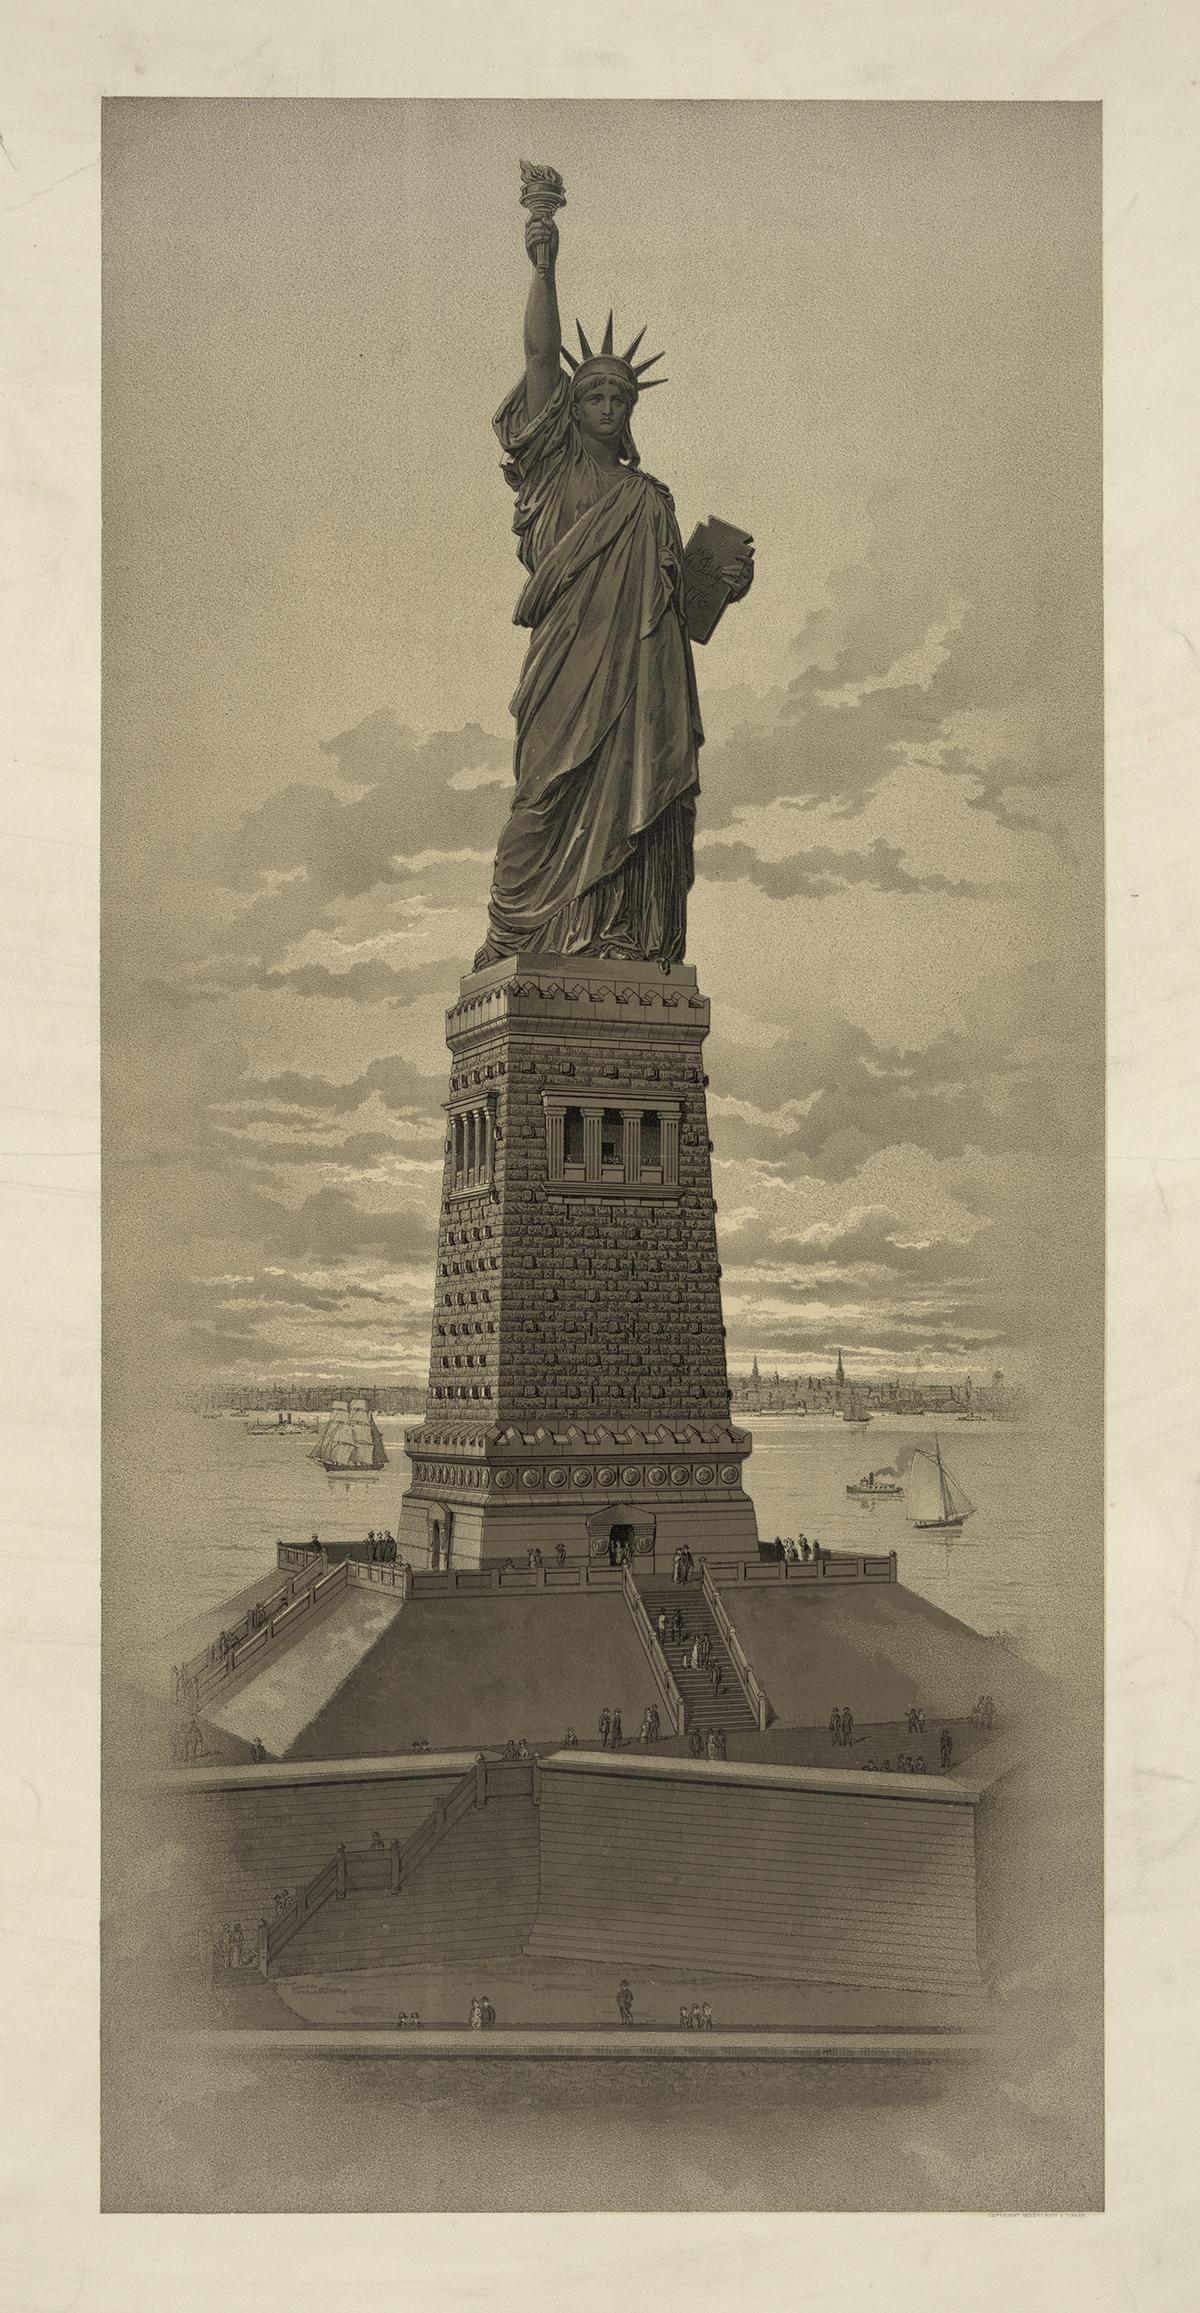 The 151-foot-tall bronze neoclassical statue has stood on its pedestal overlooking New York’s harbor since 1886. Drawing and design of the Statue of Liberty, 1884. Library of Congress. (Public Domain)